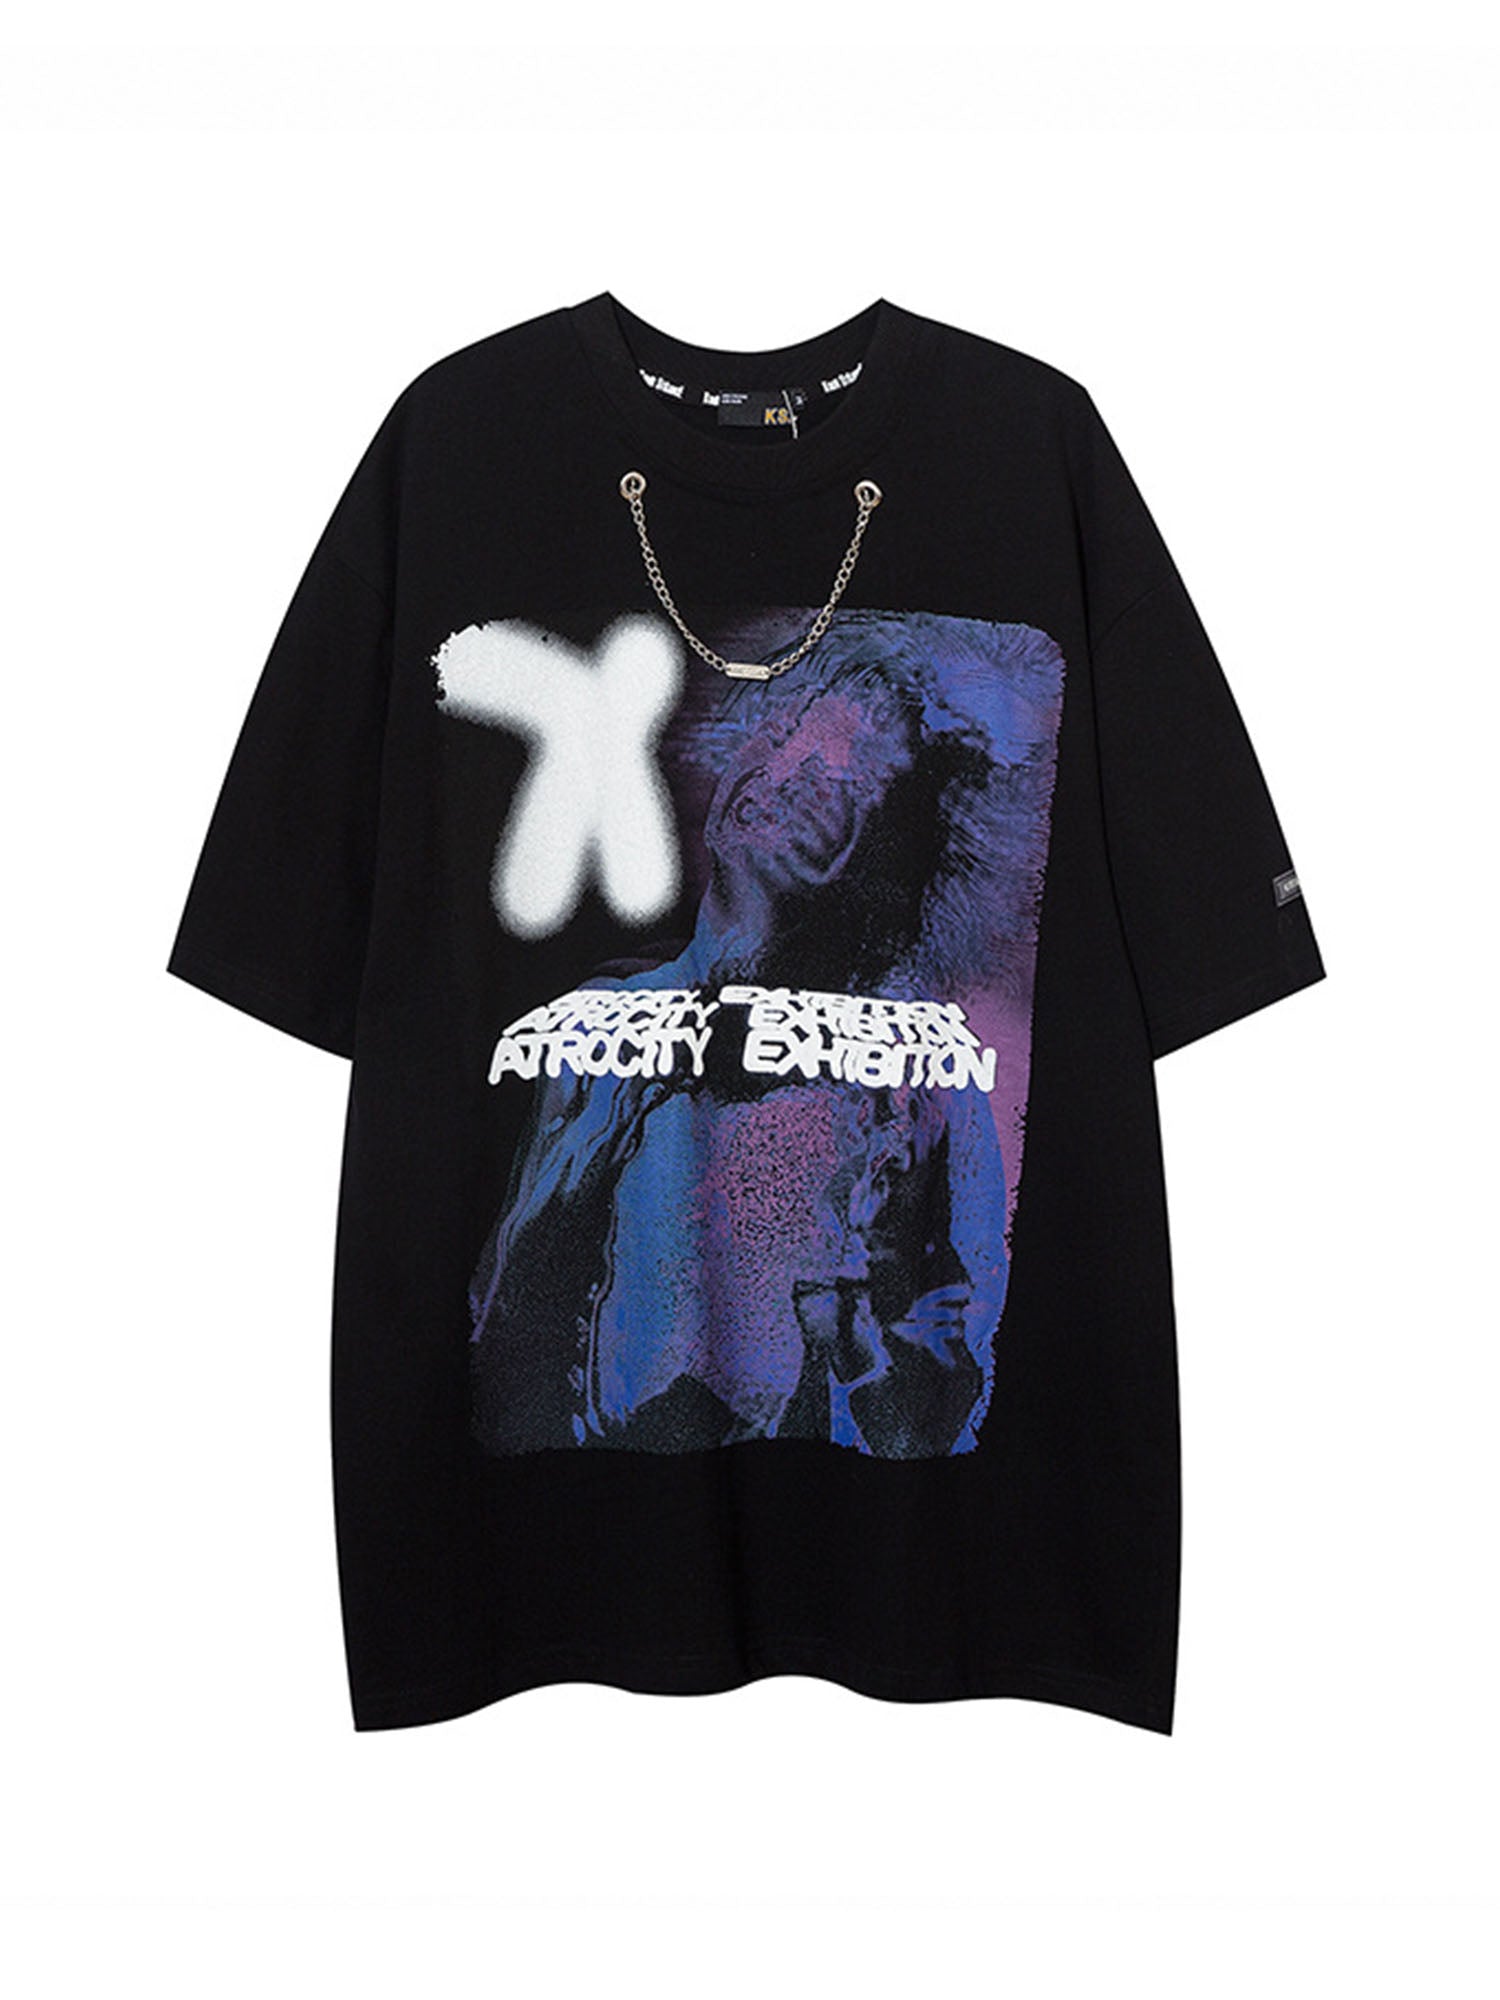 JUSTNOTAG People Abstract Decorative Chain Short Sleeve Tee